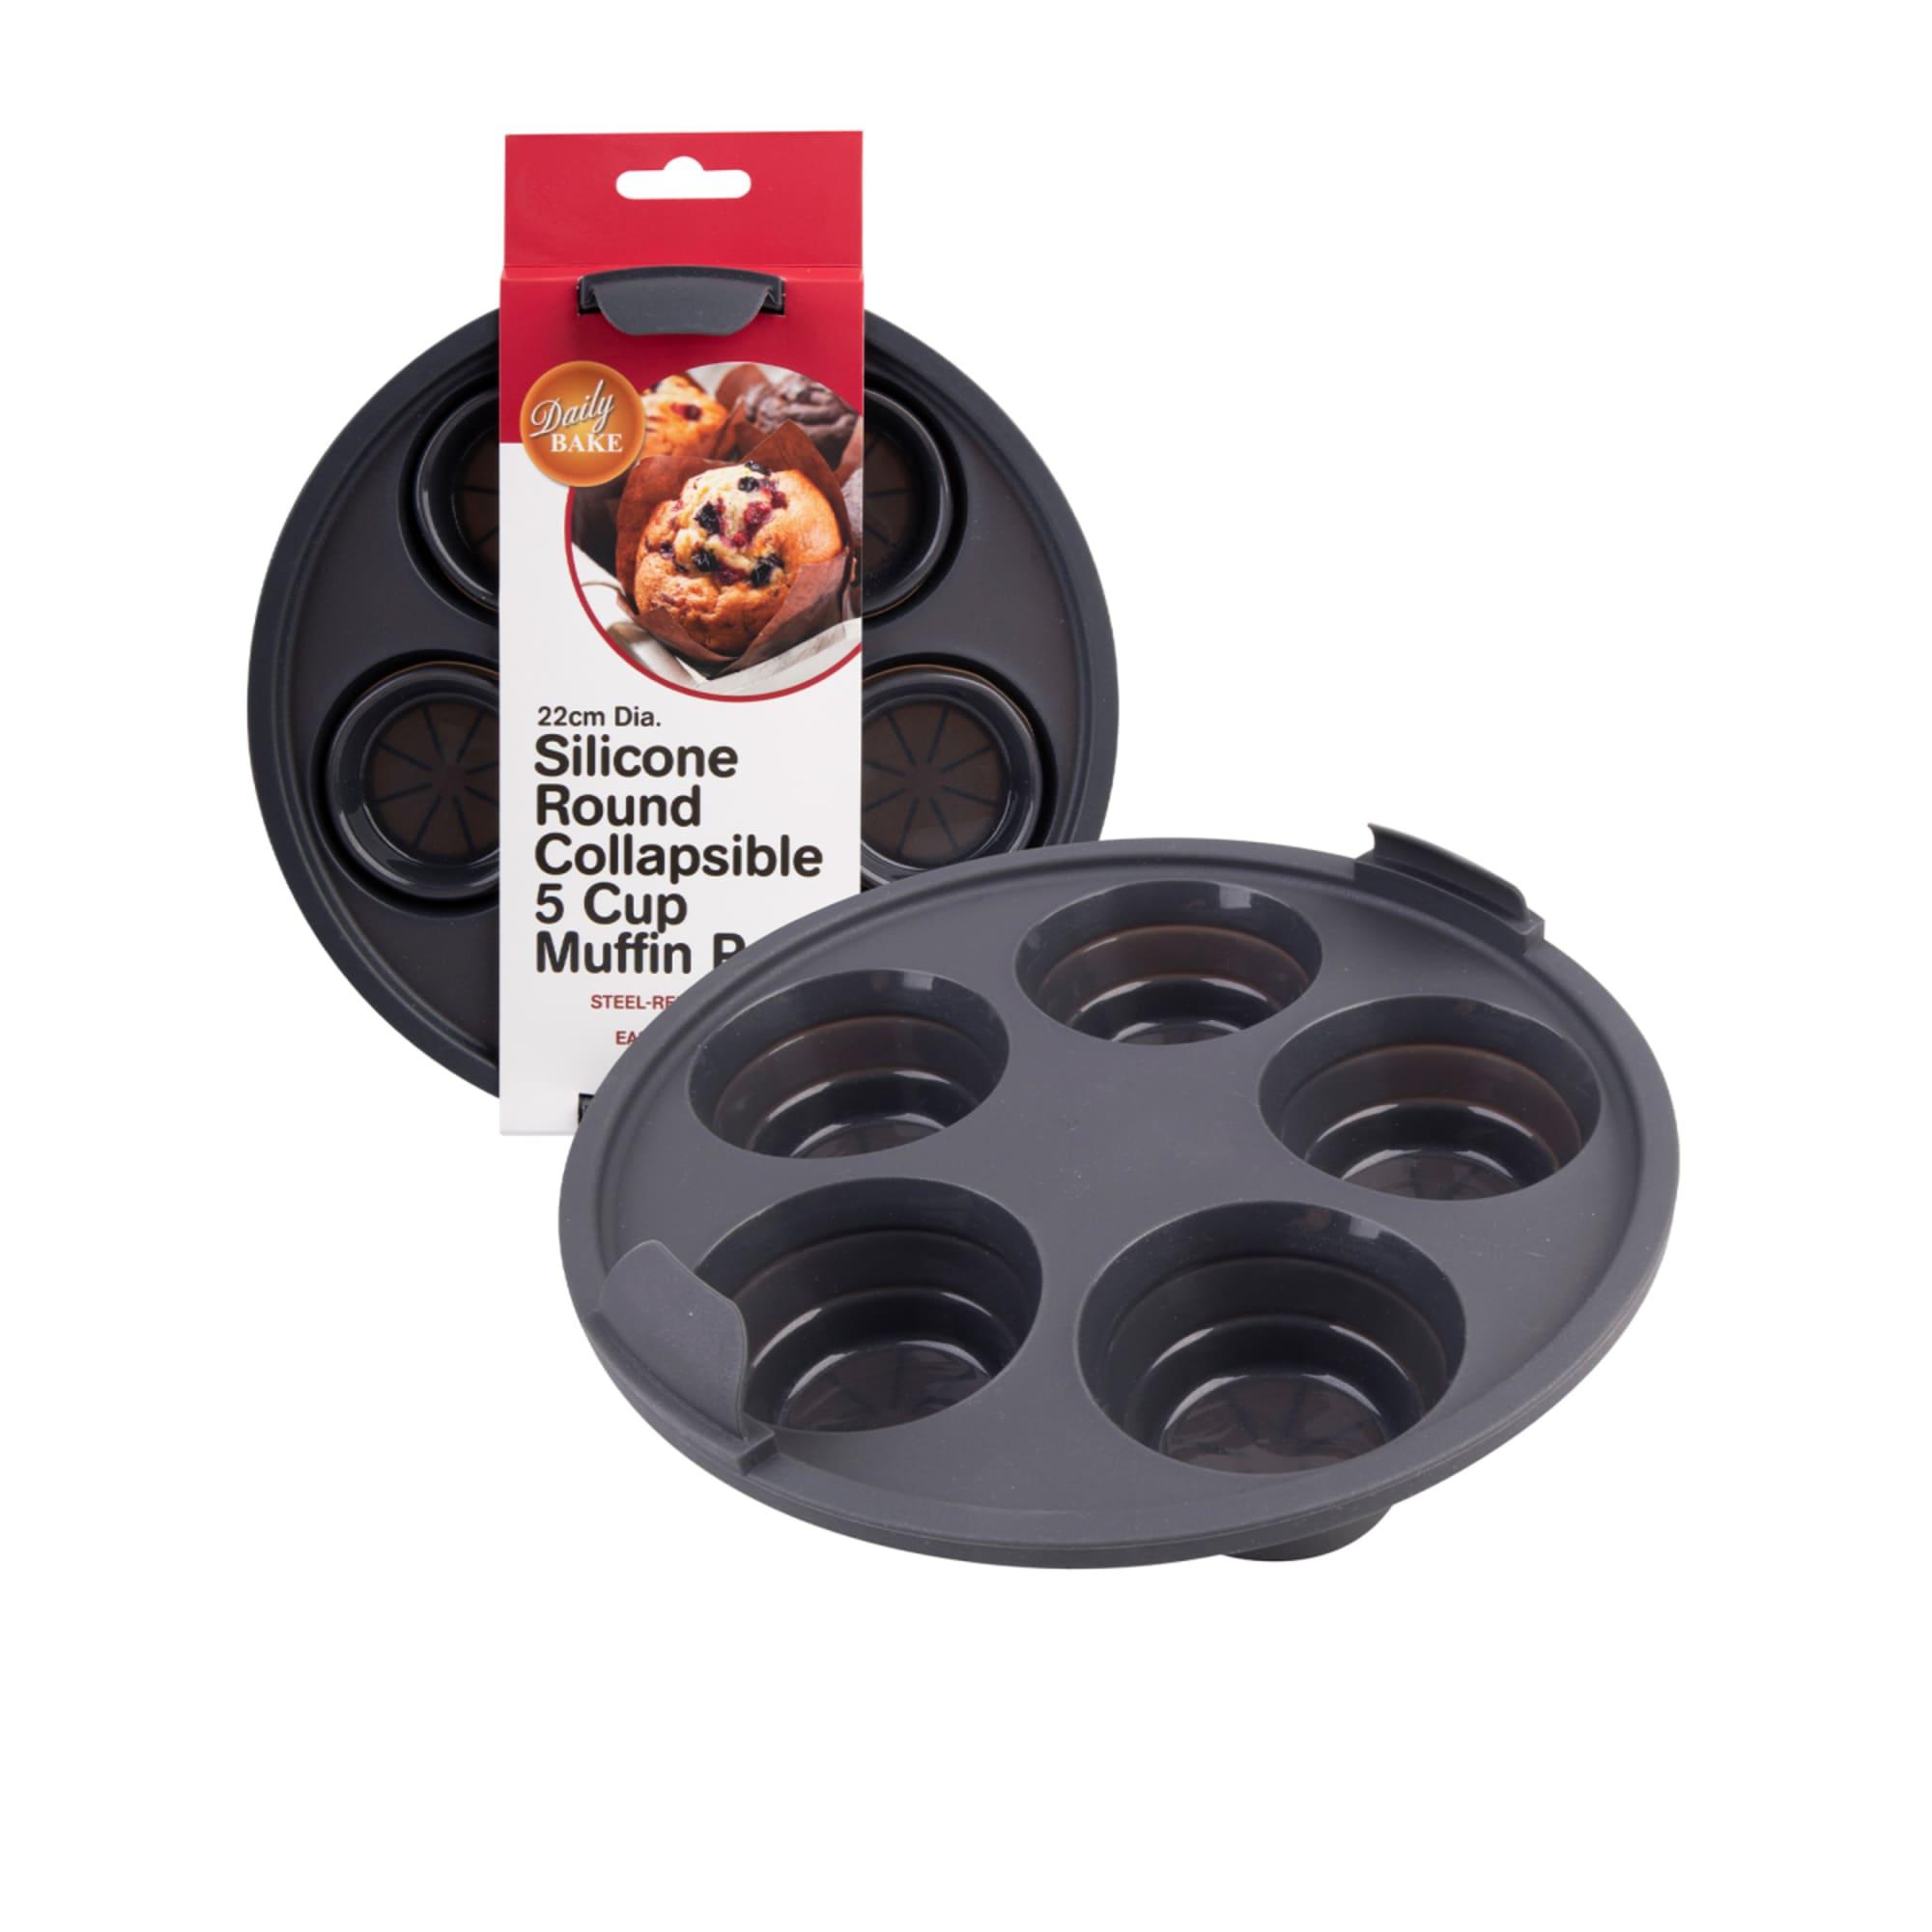 Daily Bake Silicone Round Collapsible Air Fryer Muffin Pan 5 Cup Image 6